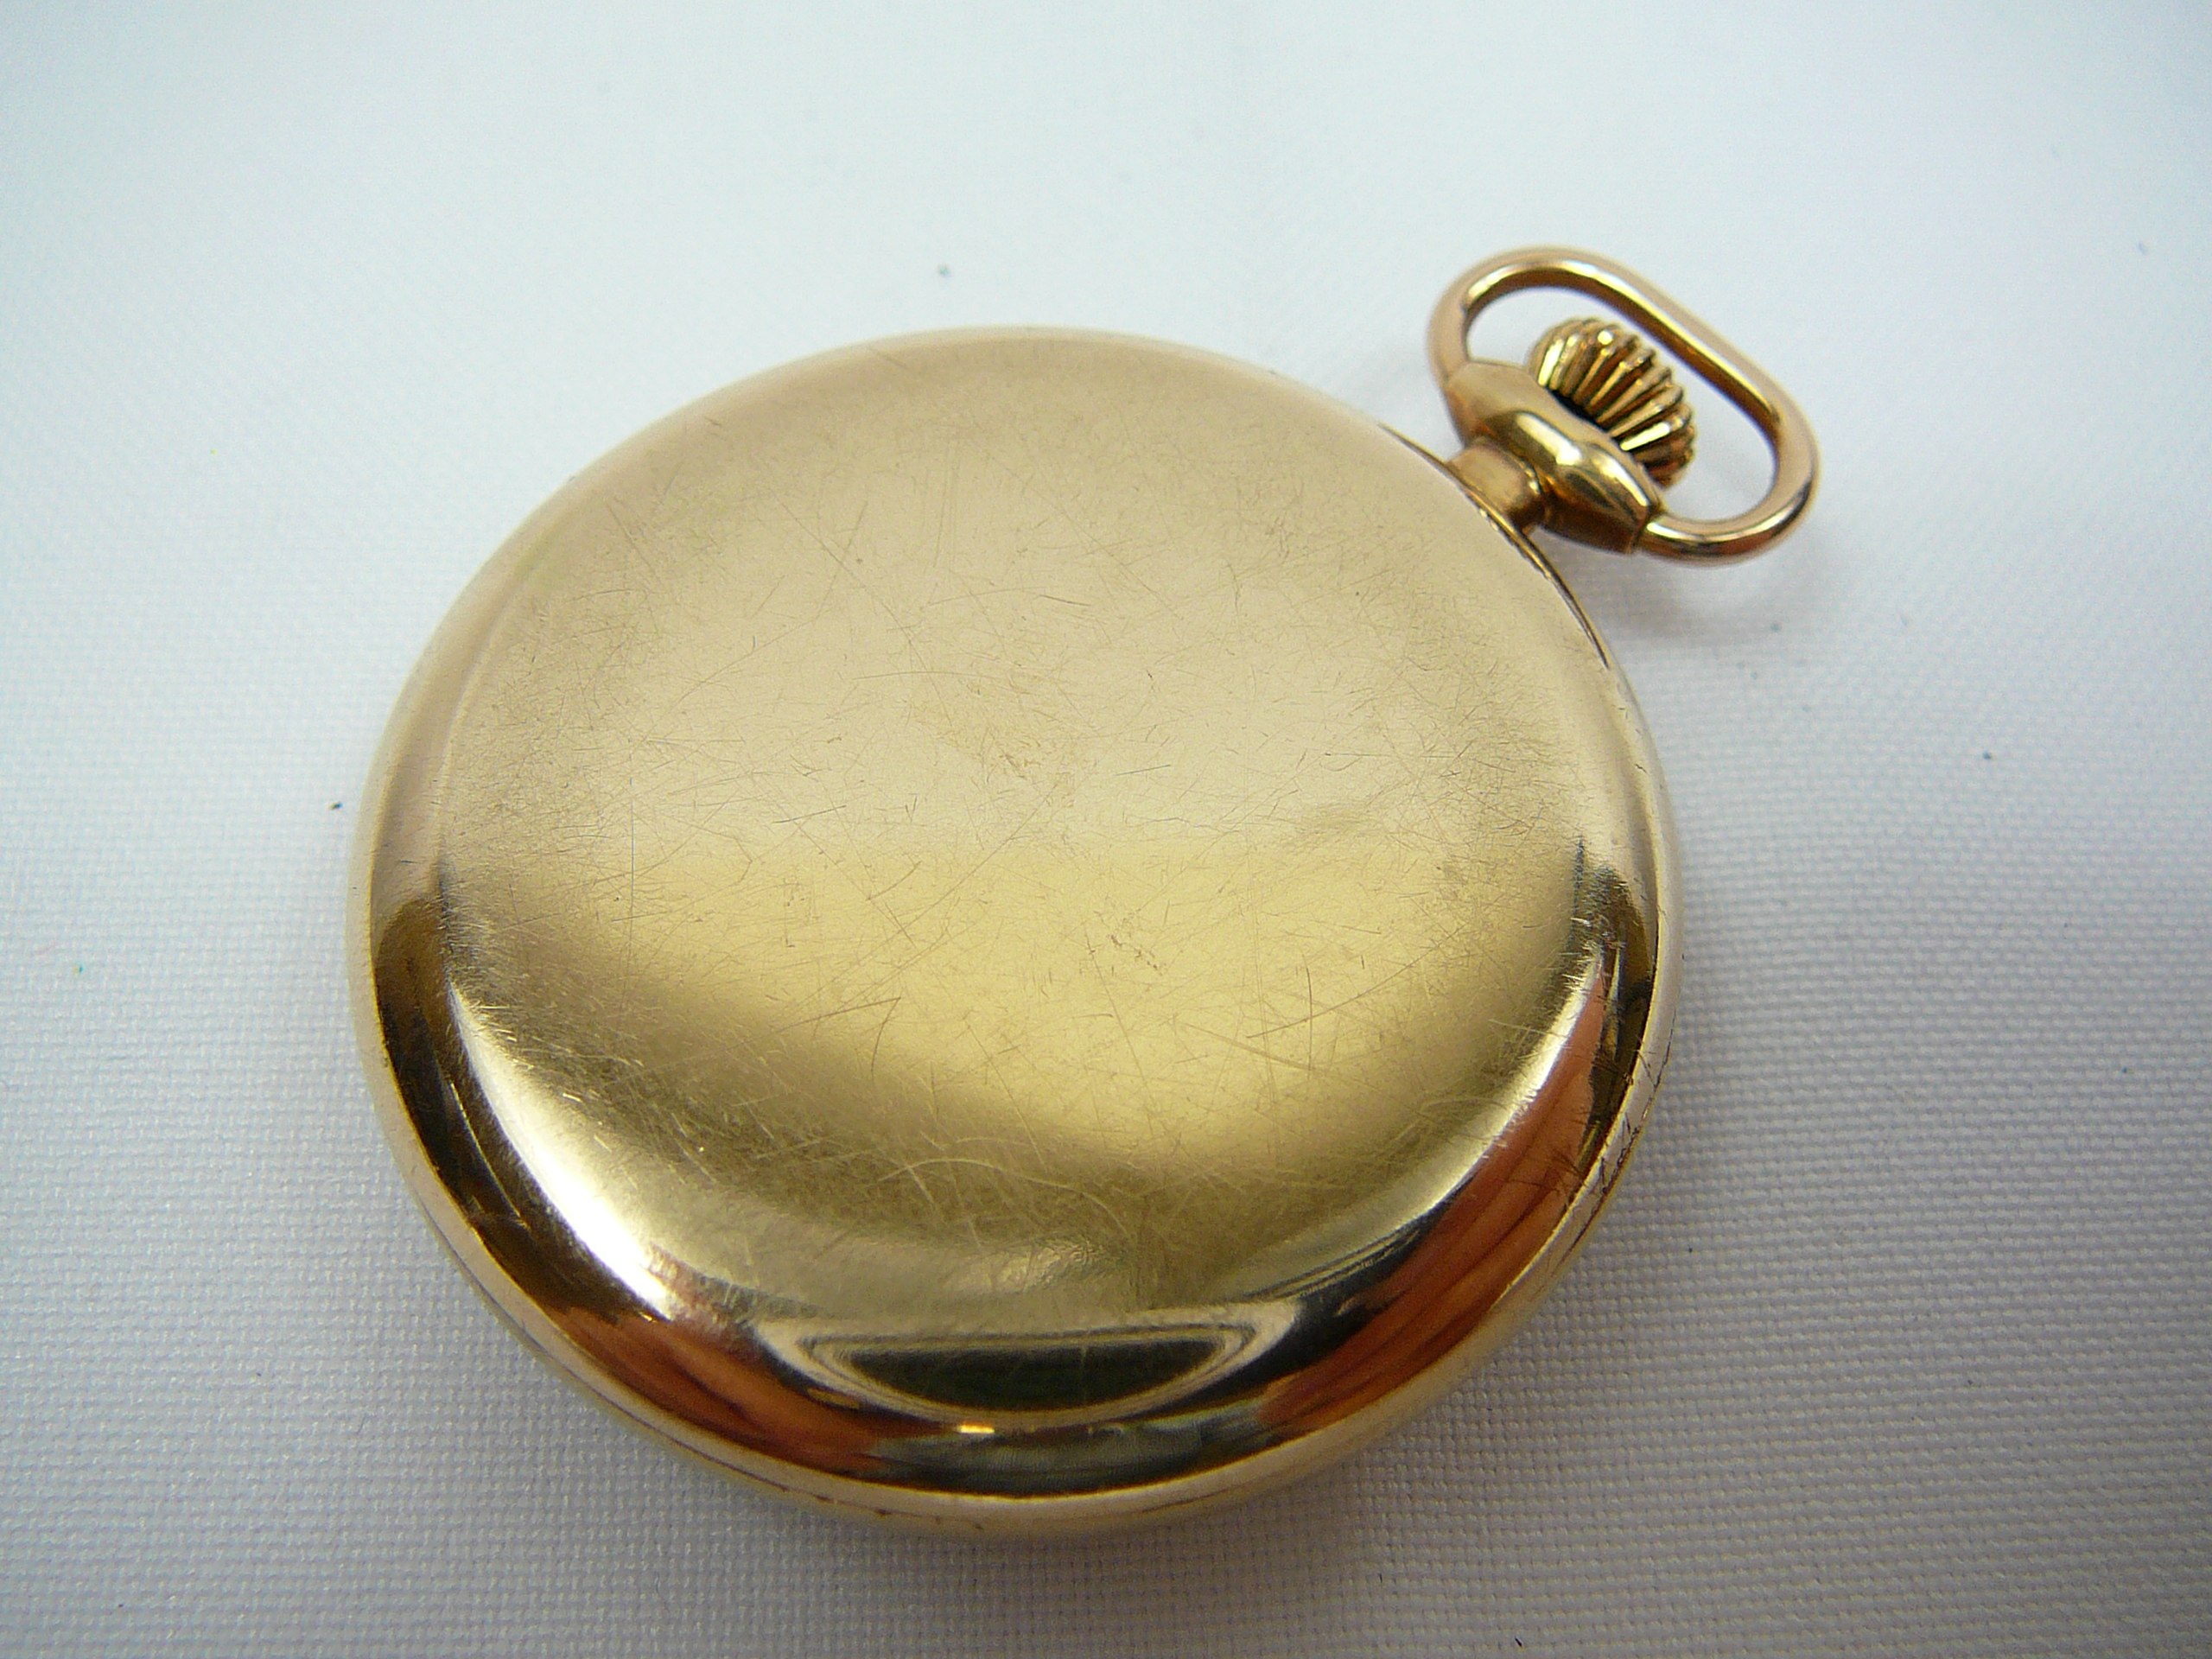 Gents gold Zenith pocketwatch - Image 3 of 10